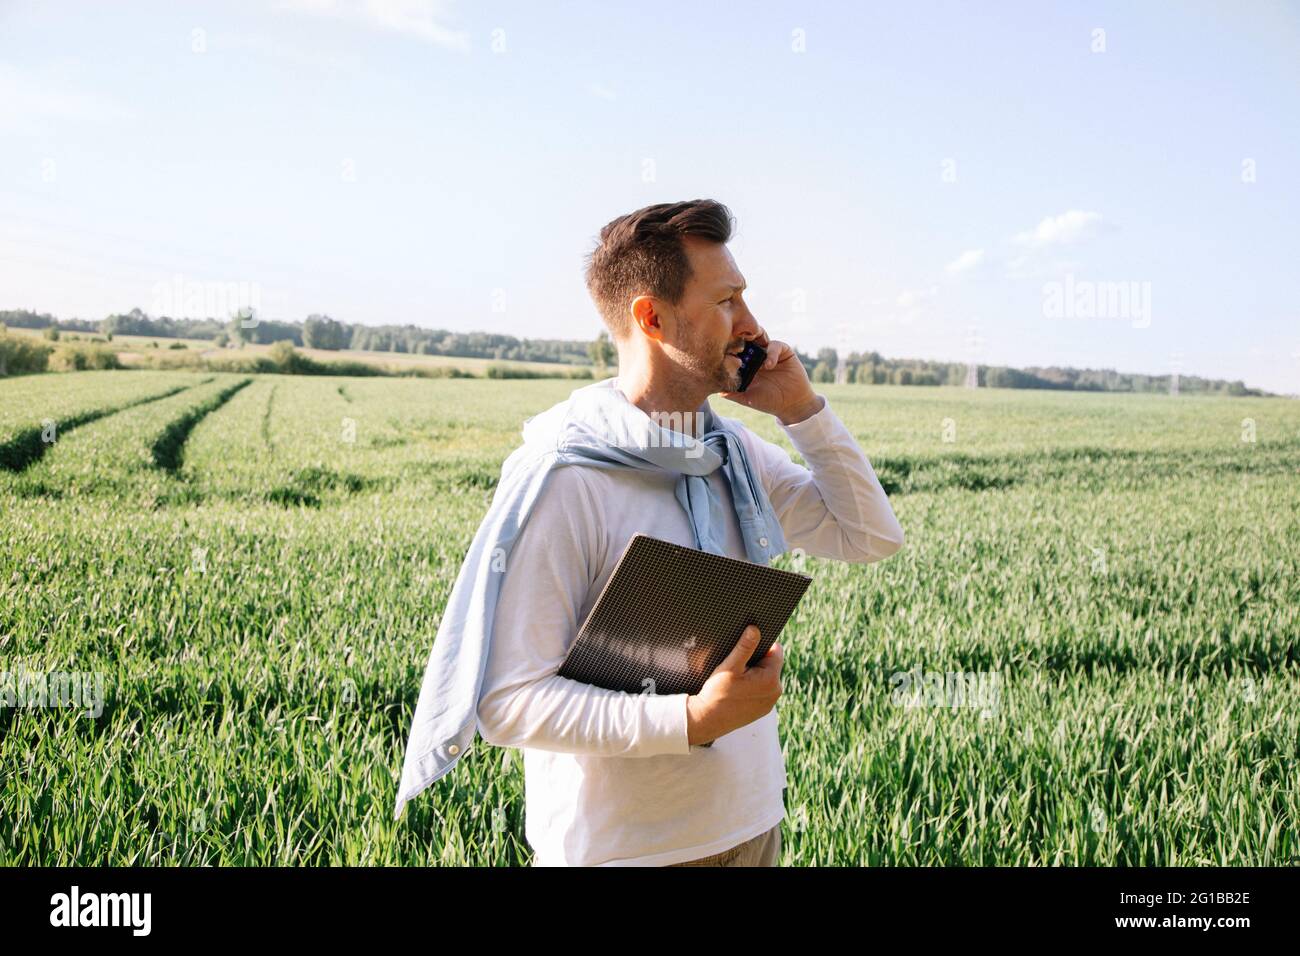 40-year-old young farmer checks his crop and negotiates deal on smart phone Stock Photo